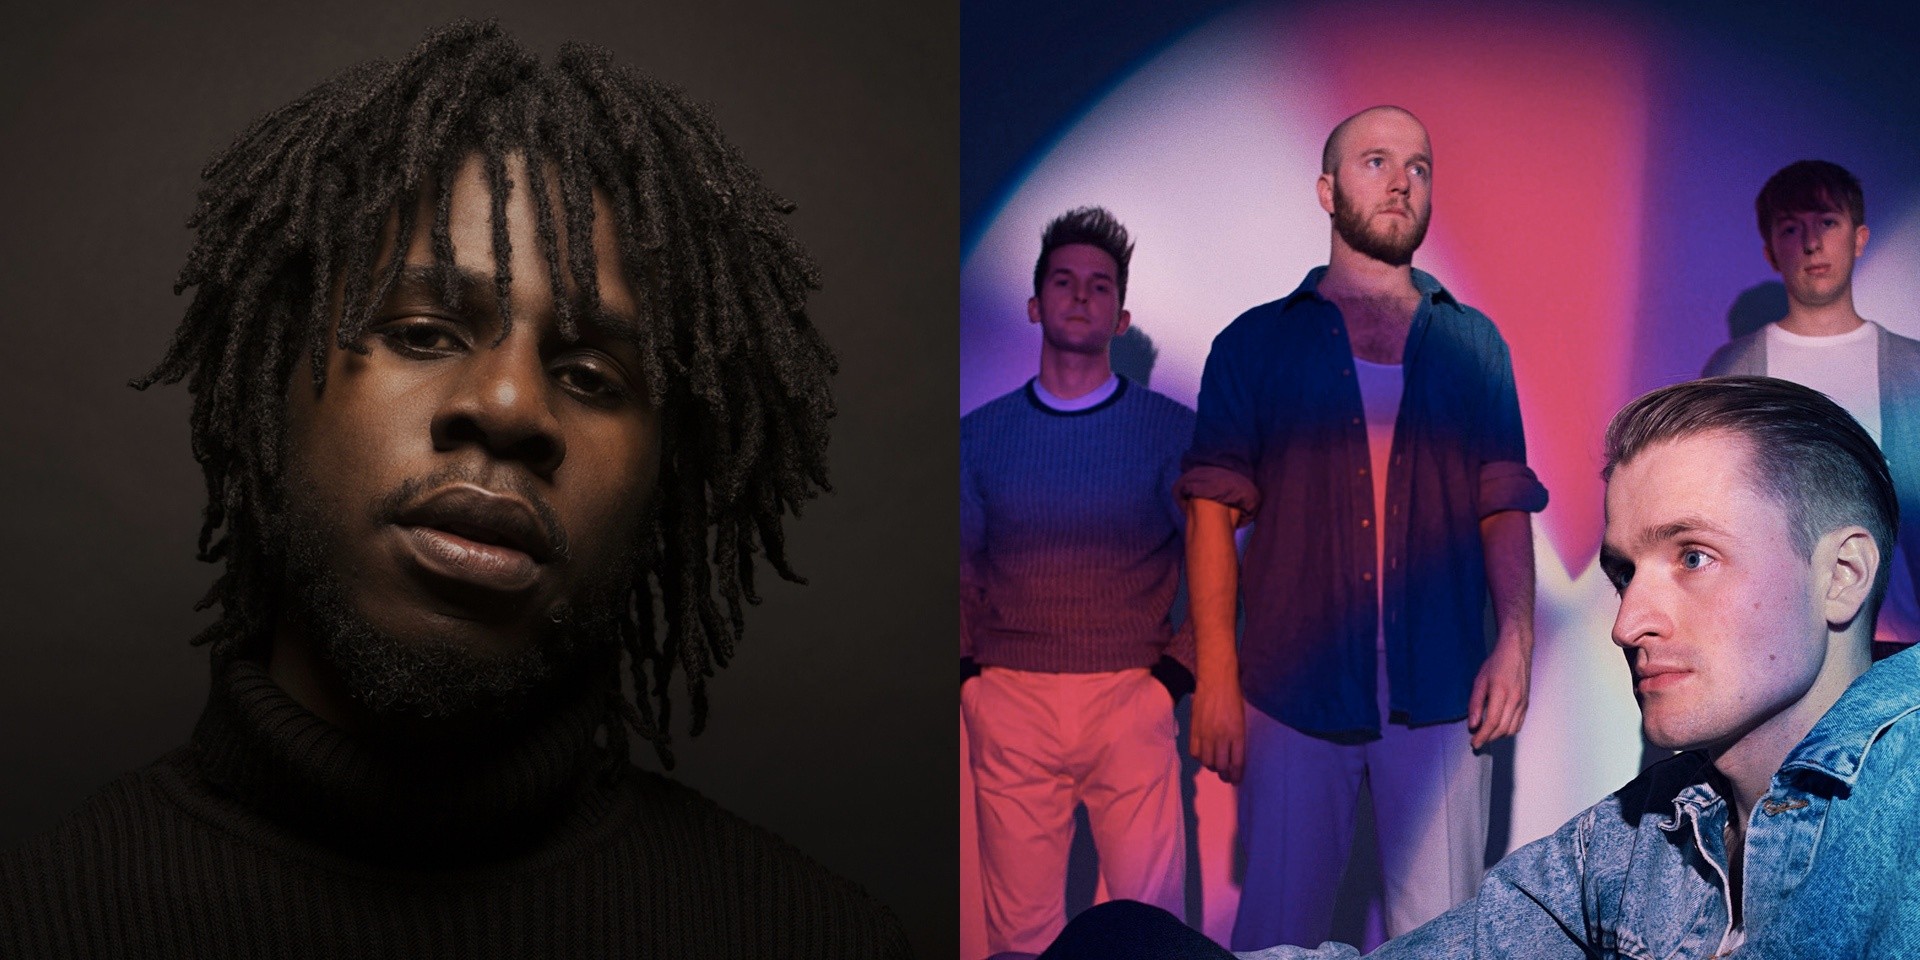 Wonderfruit Festival adds Chronixx to line-up, offers your last chance to see Wild Beasts live